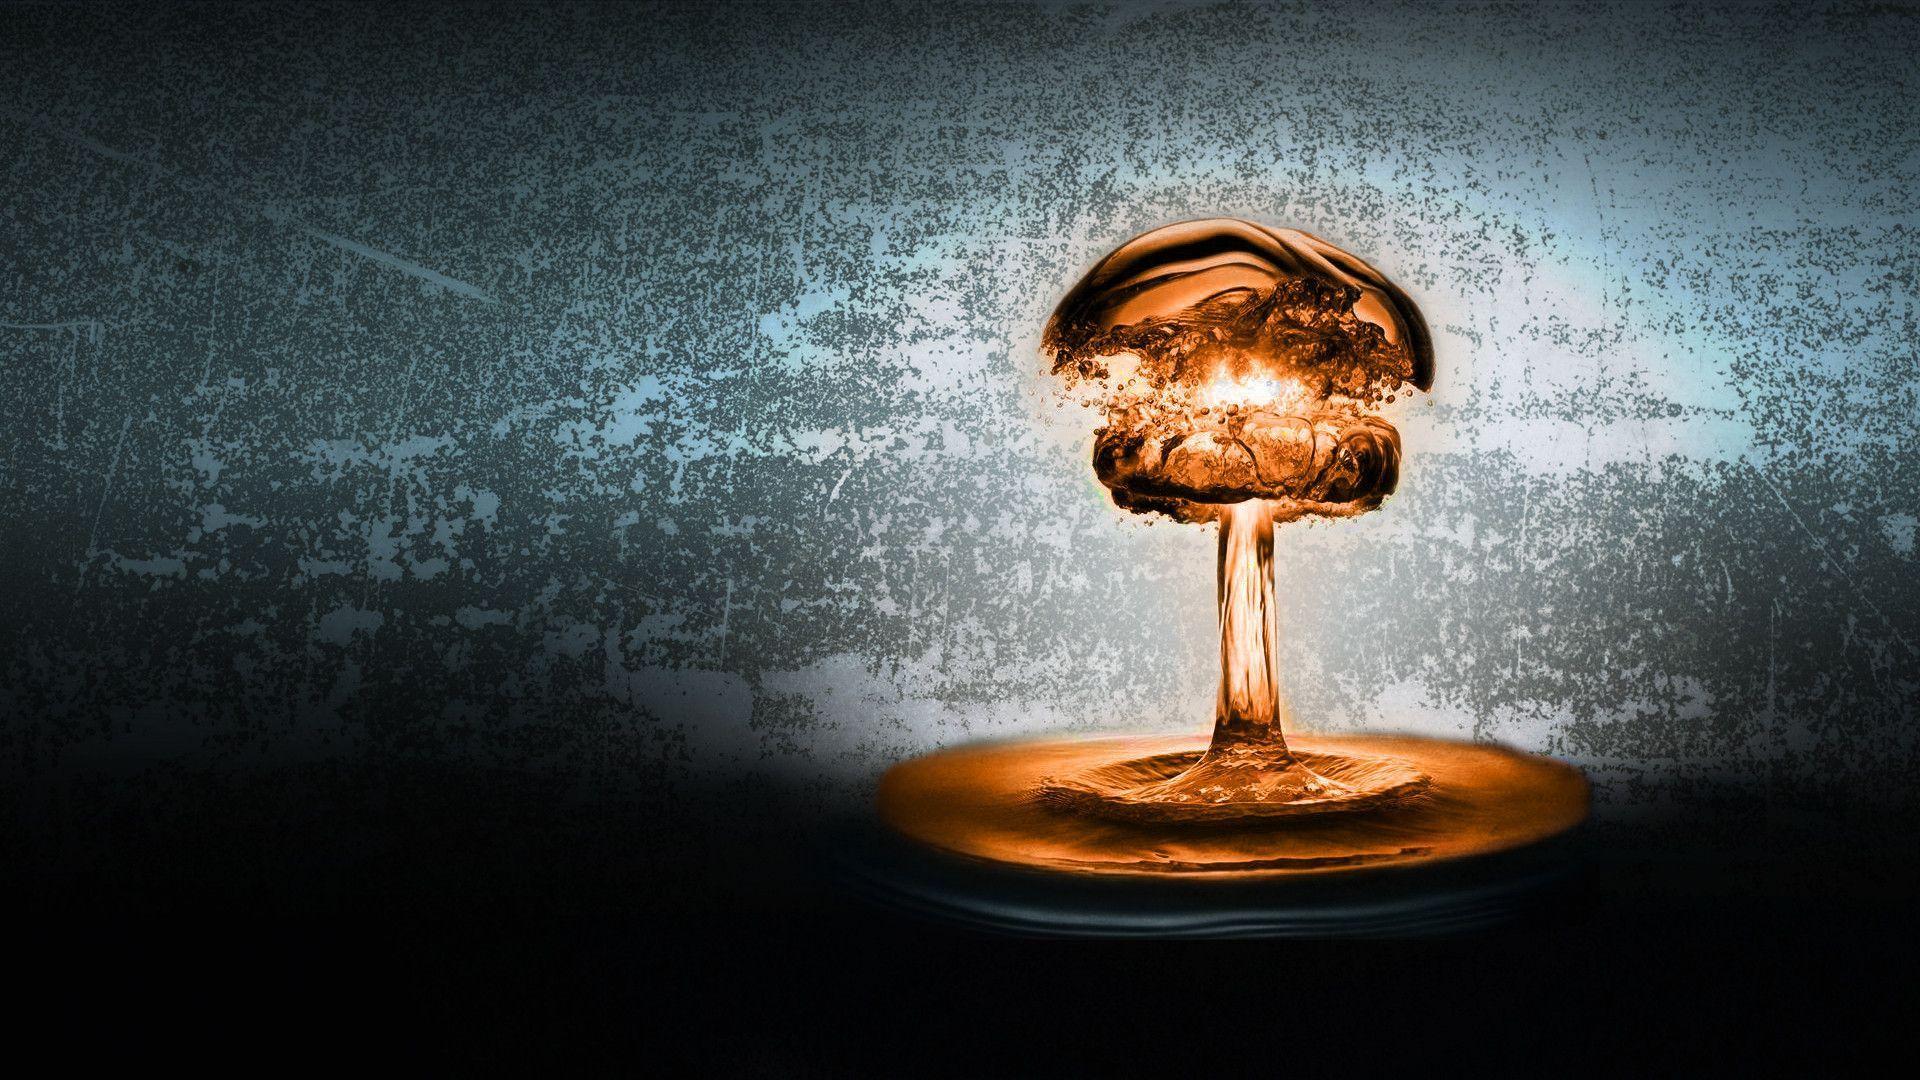 Water Droplet Nuke, 1920x1080. Tweaked from a previously posted